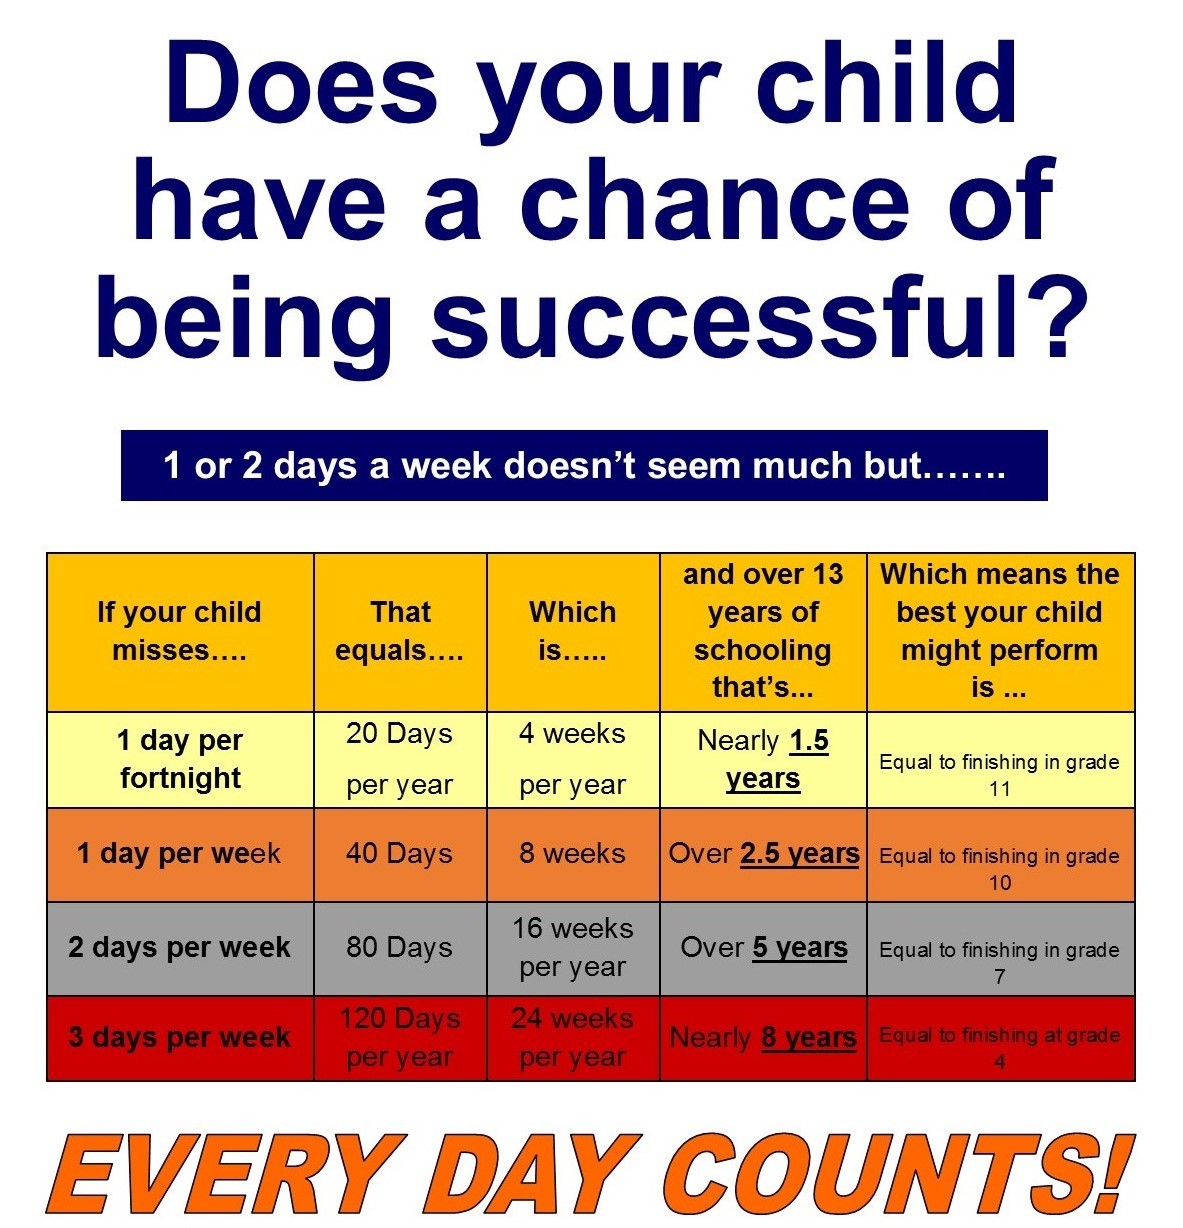 Everyday Counts Poster 1 (2).jpg